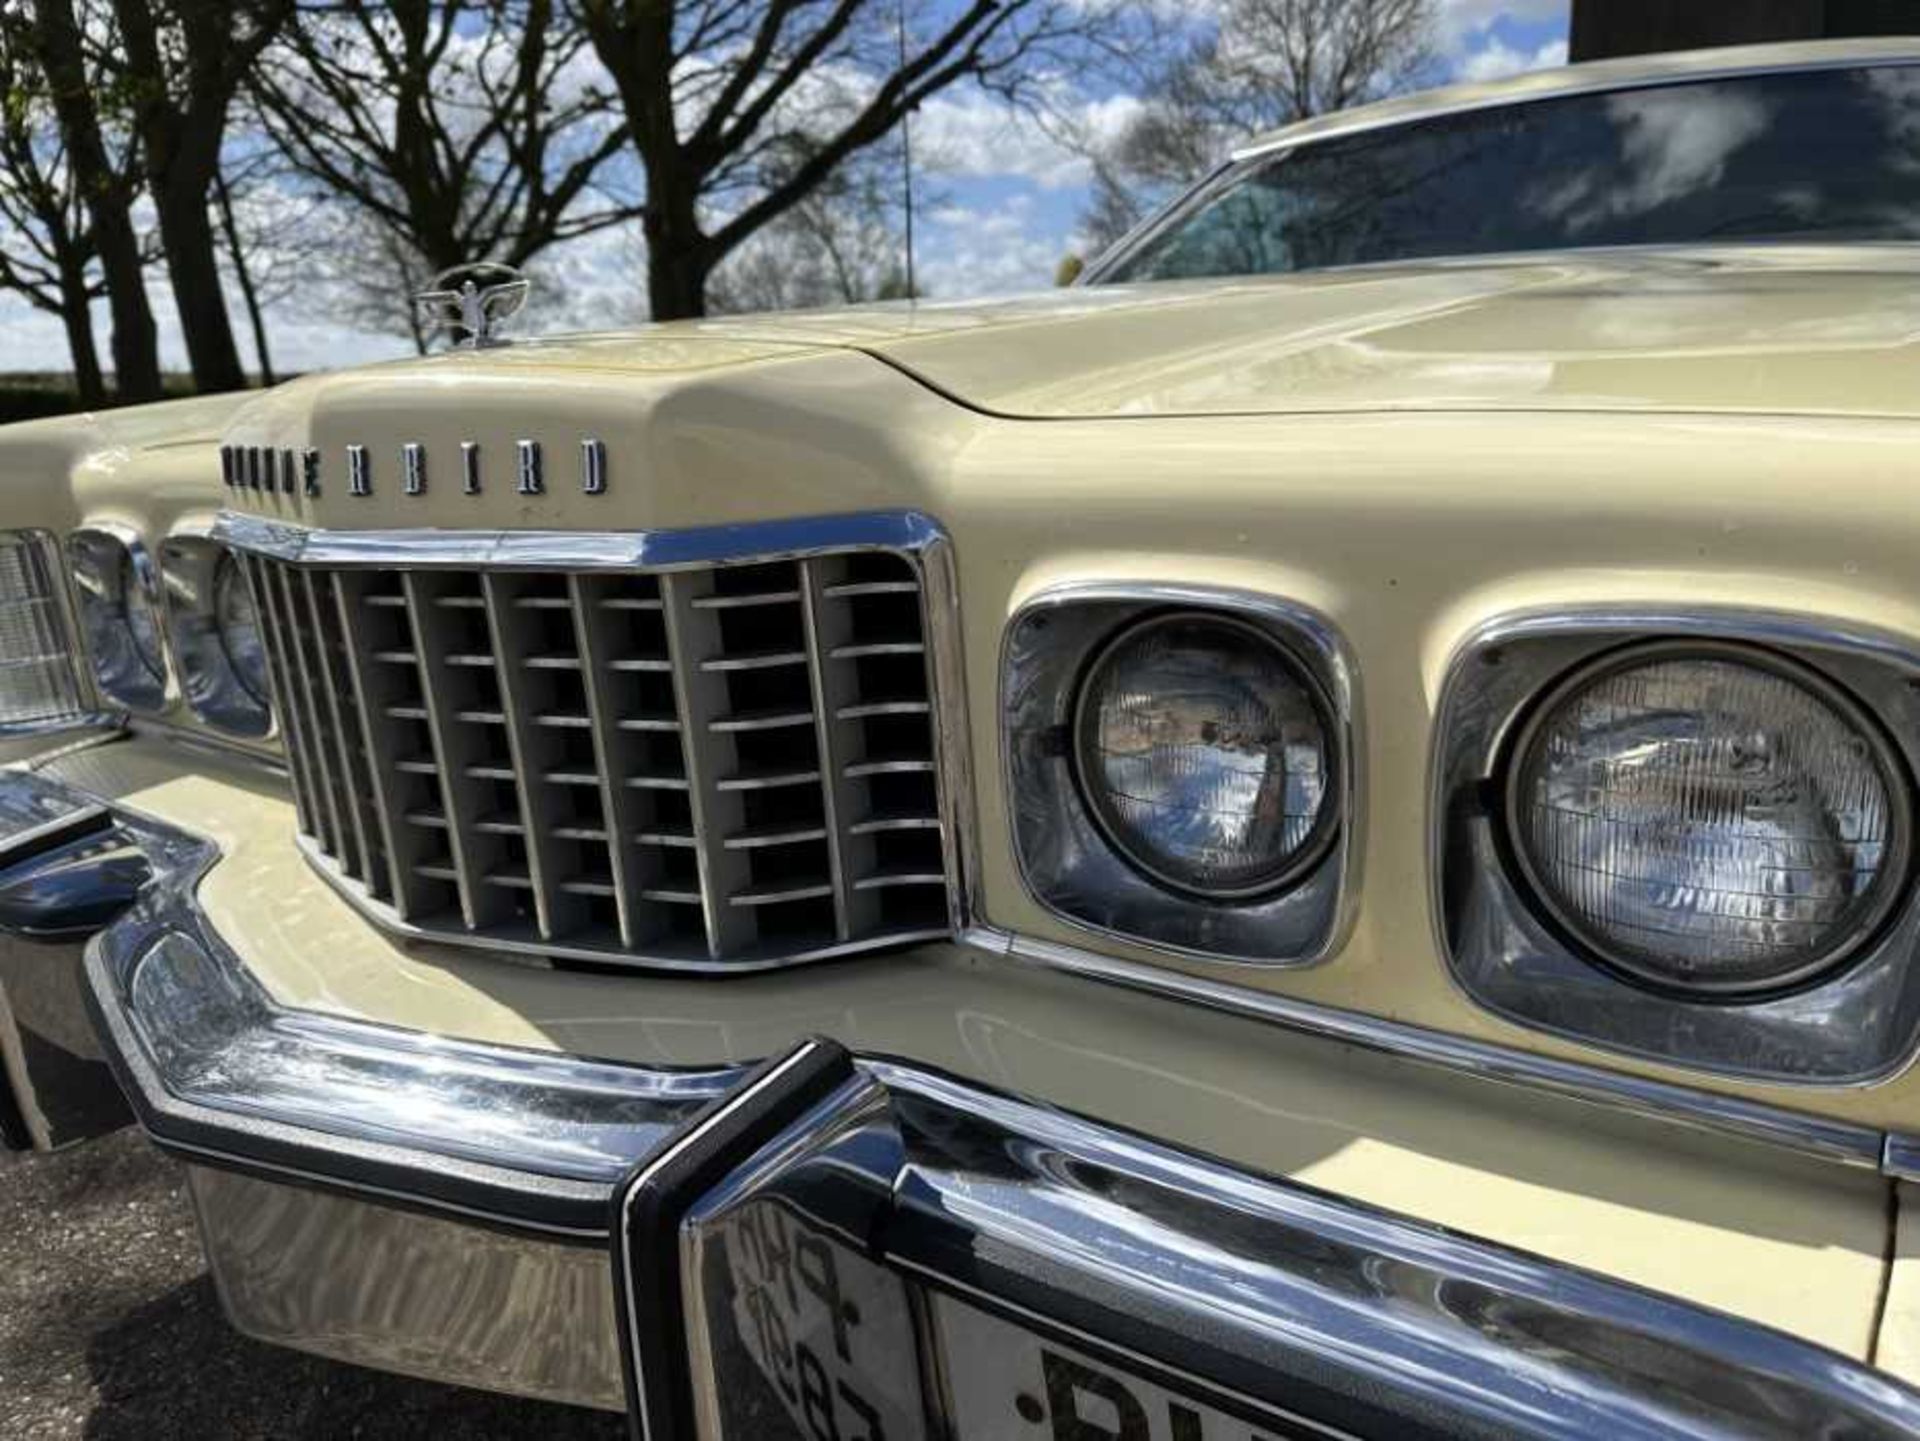 1976 Ford Thunderbird Coupe, Registration PHH 589P. This outrageous classic American grand tourer ha - Image 22 of 35